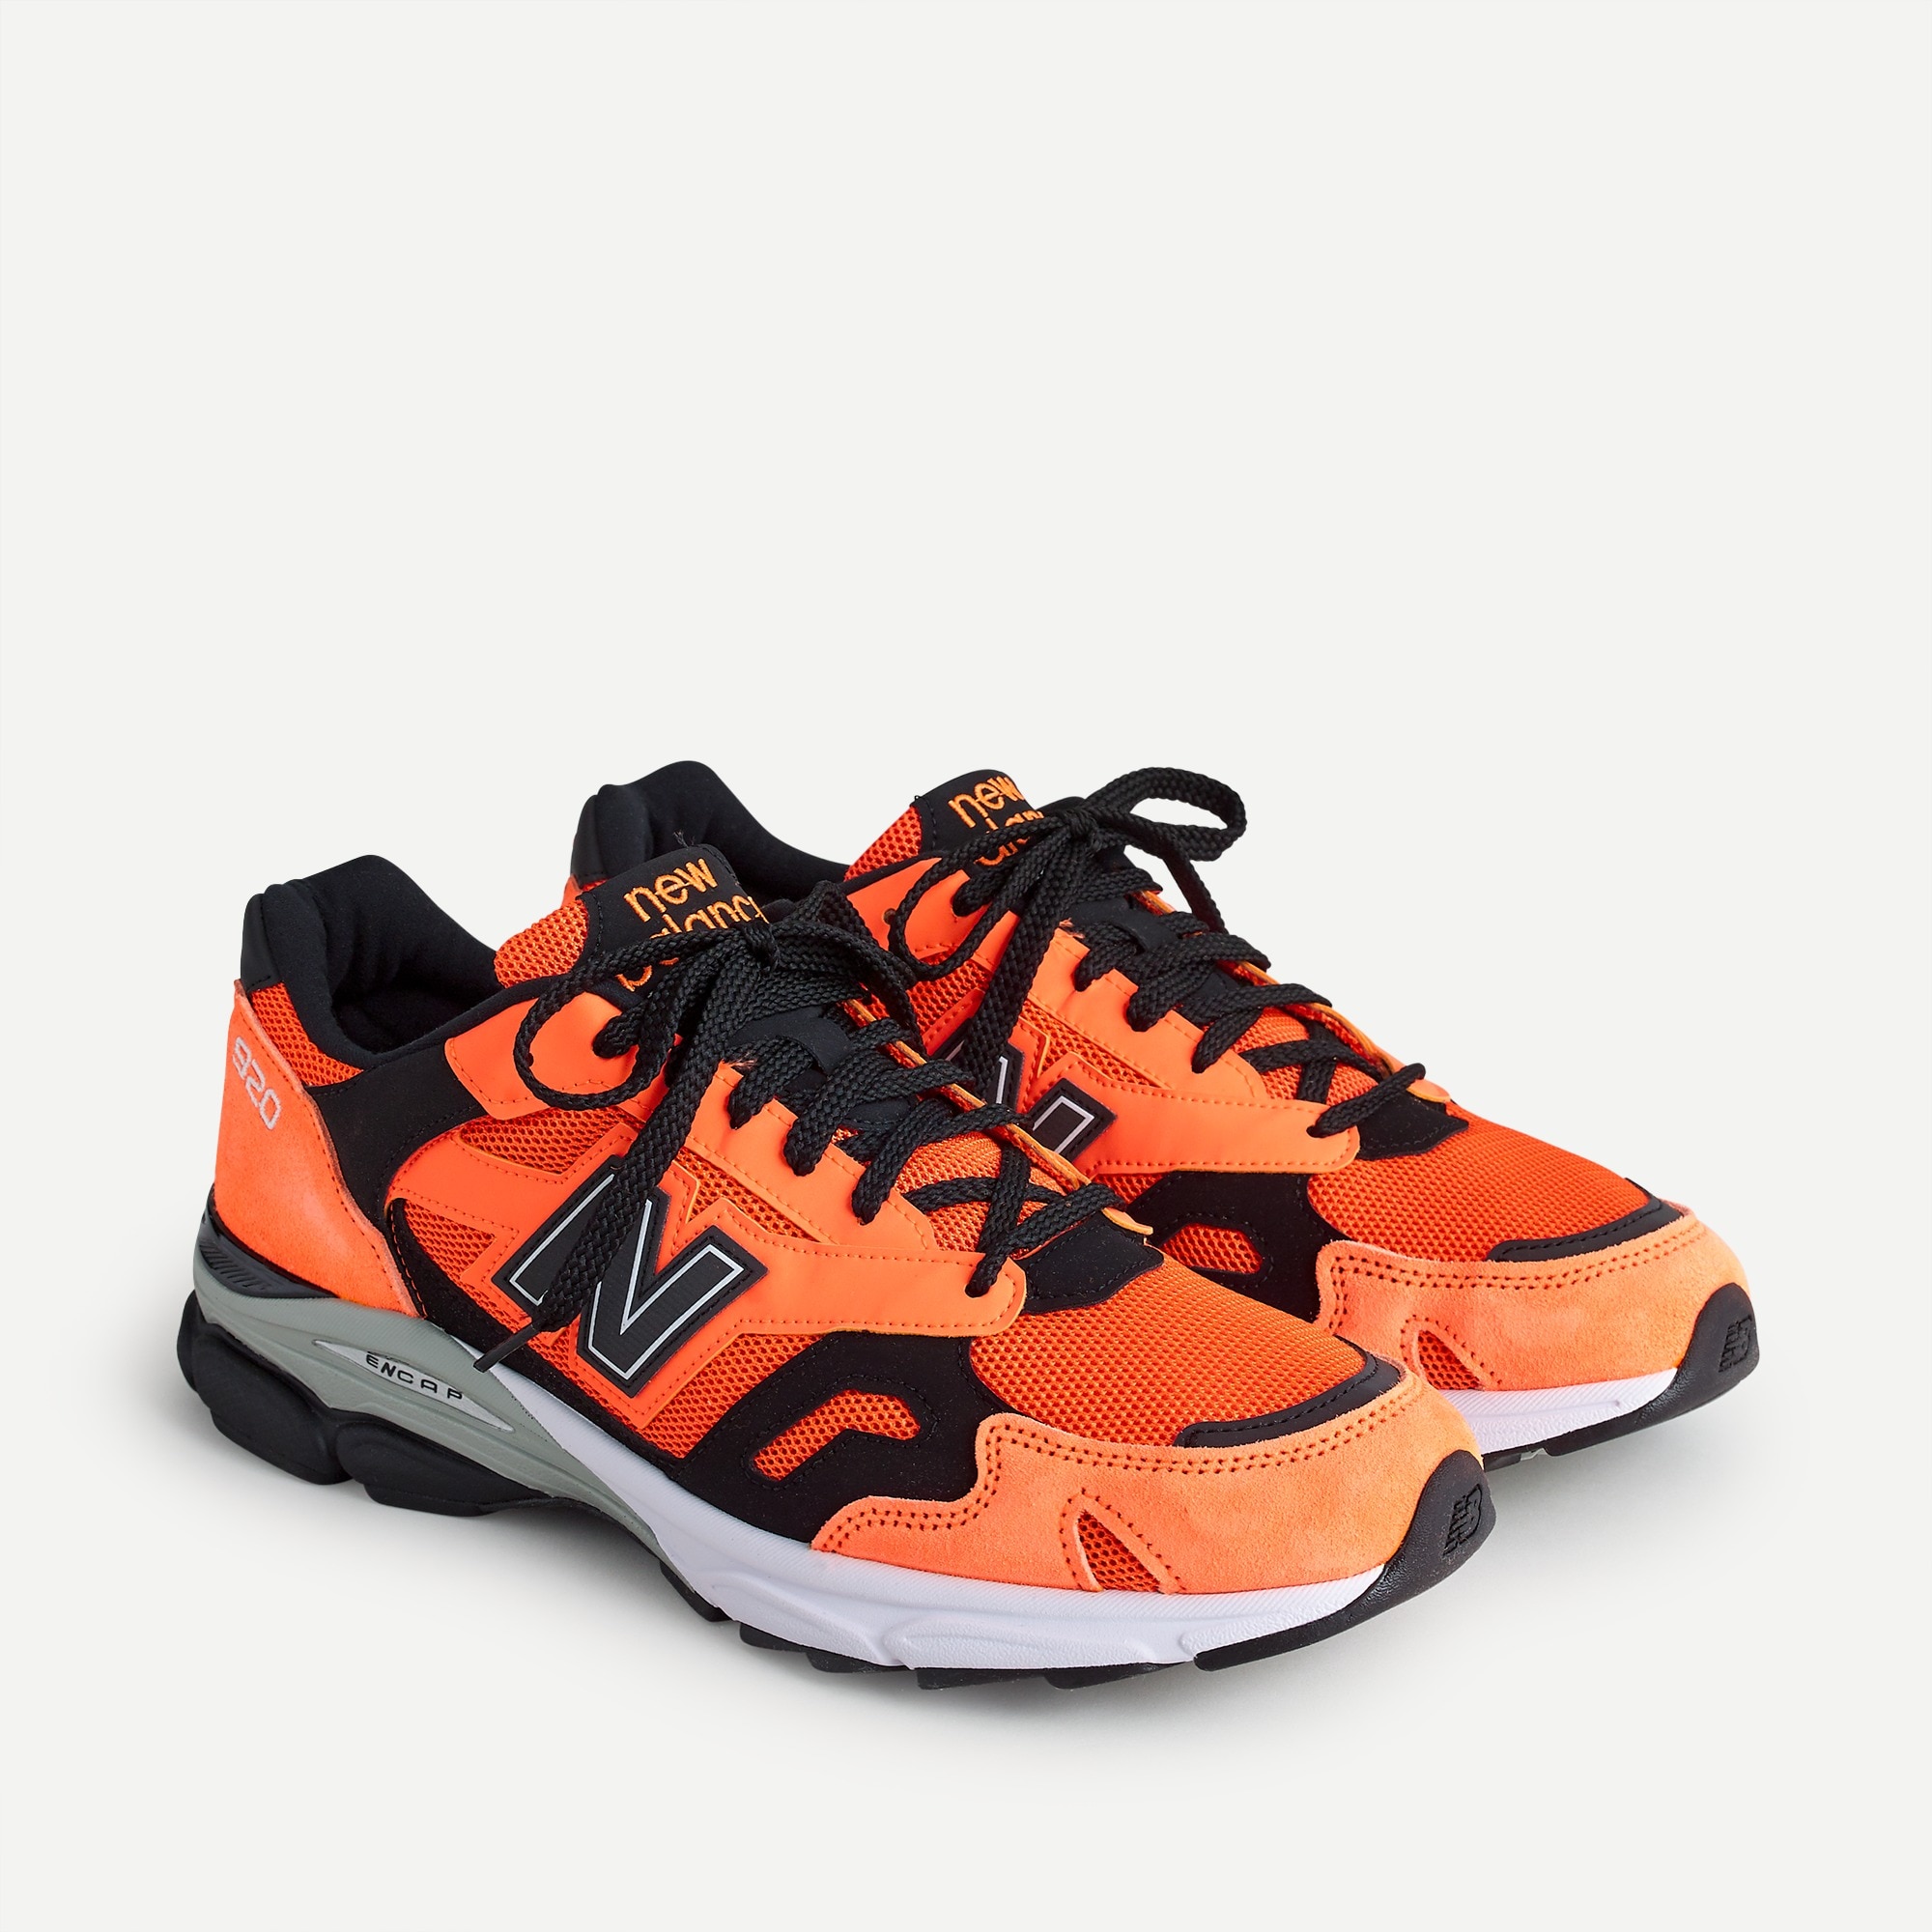 new balance made in england online shop